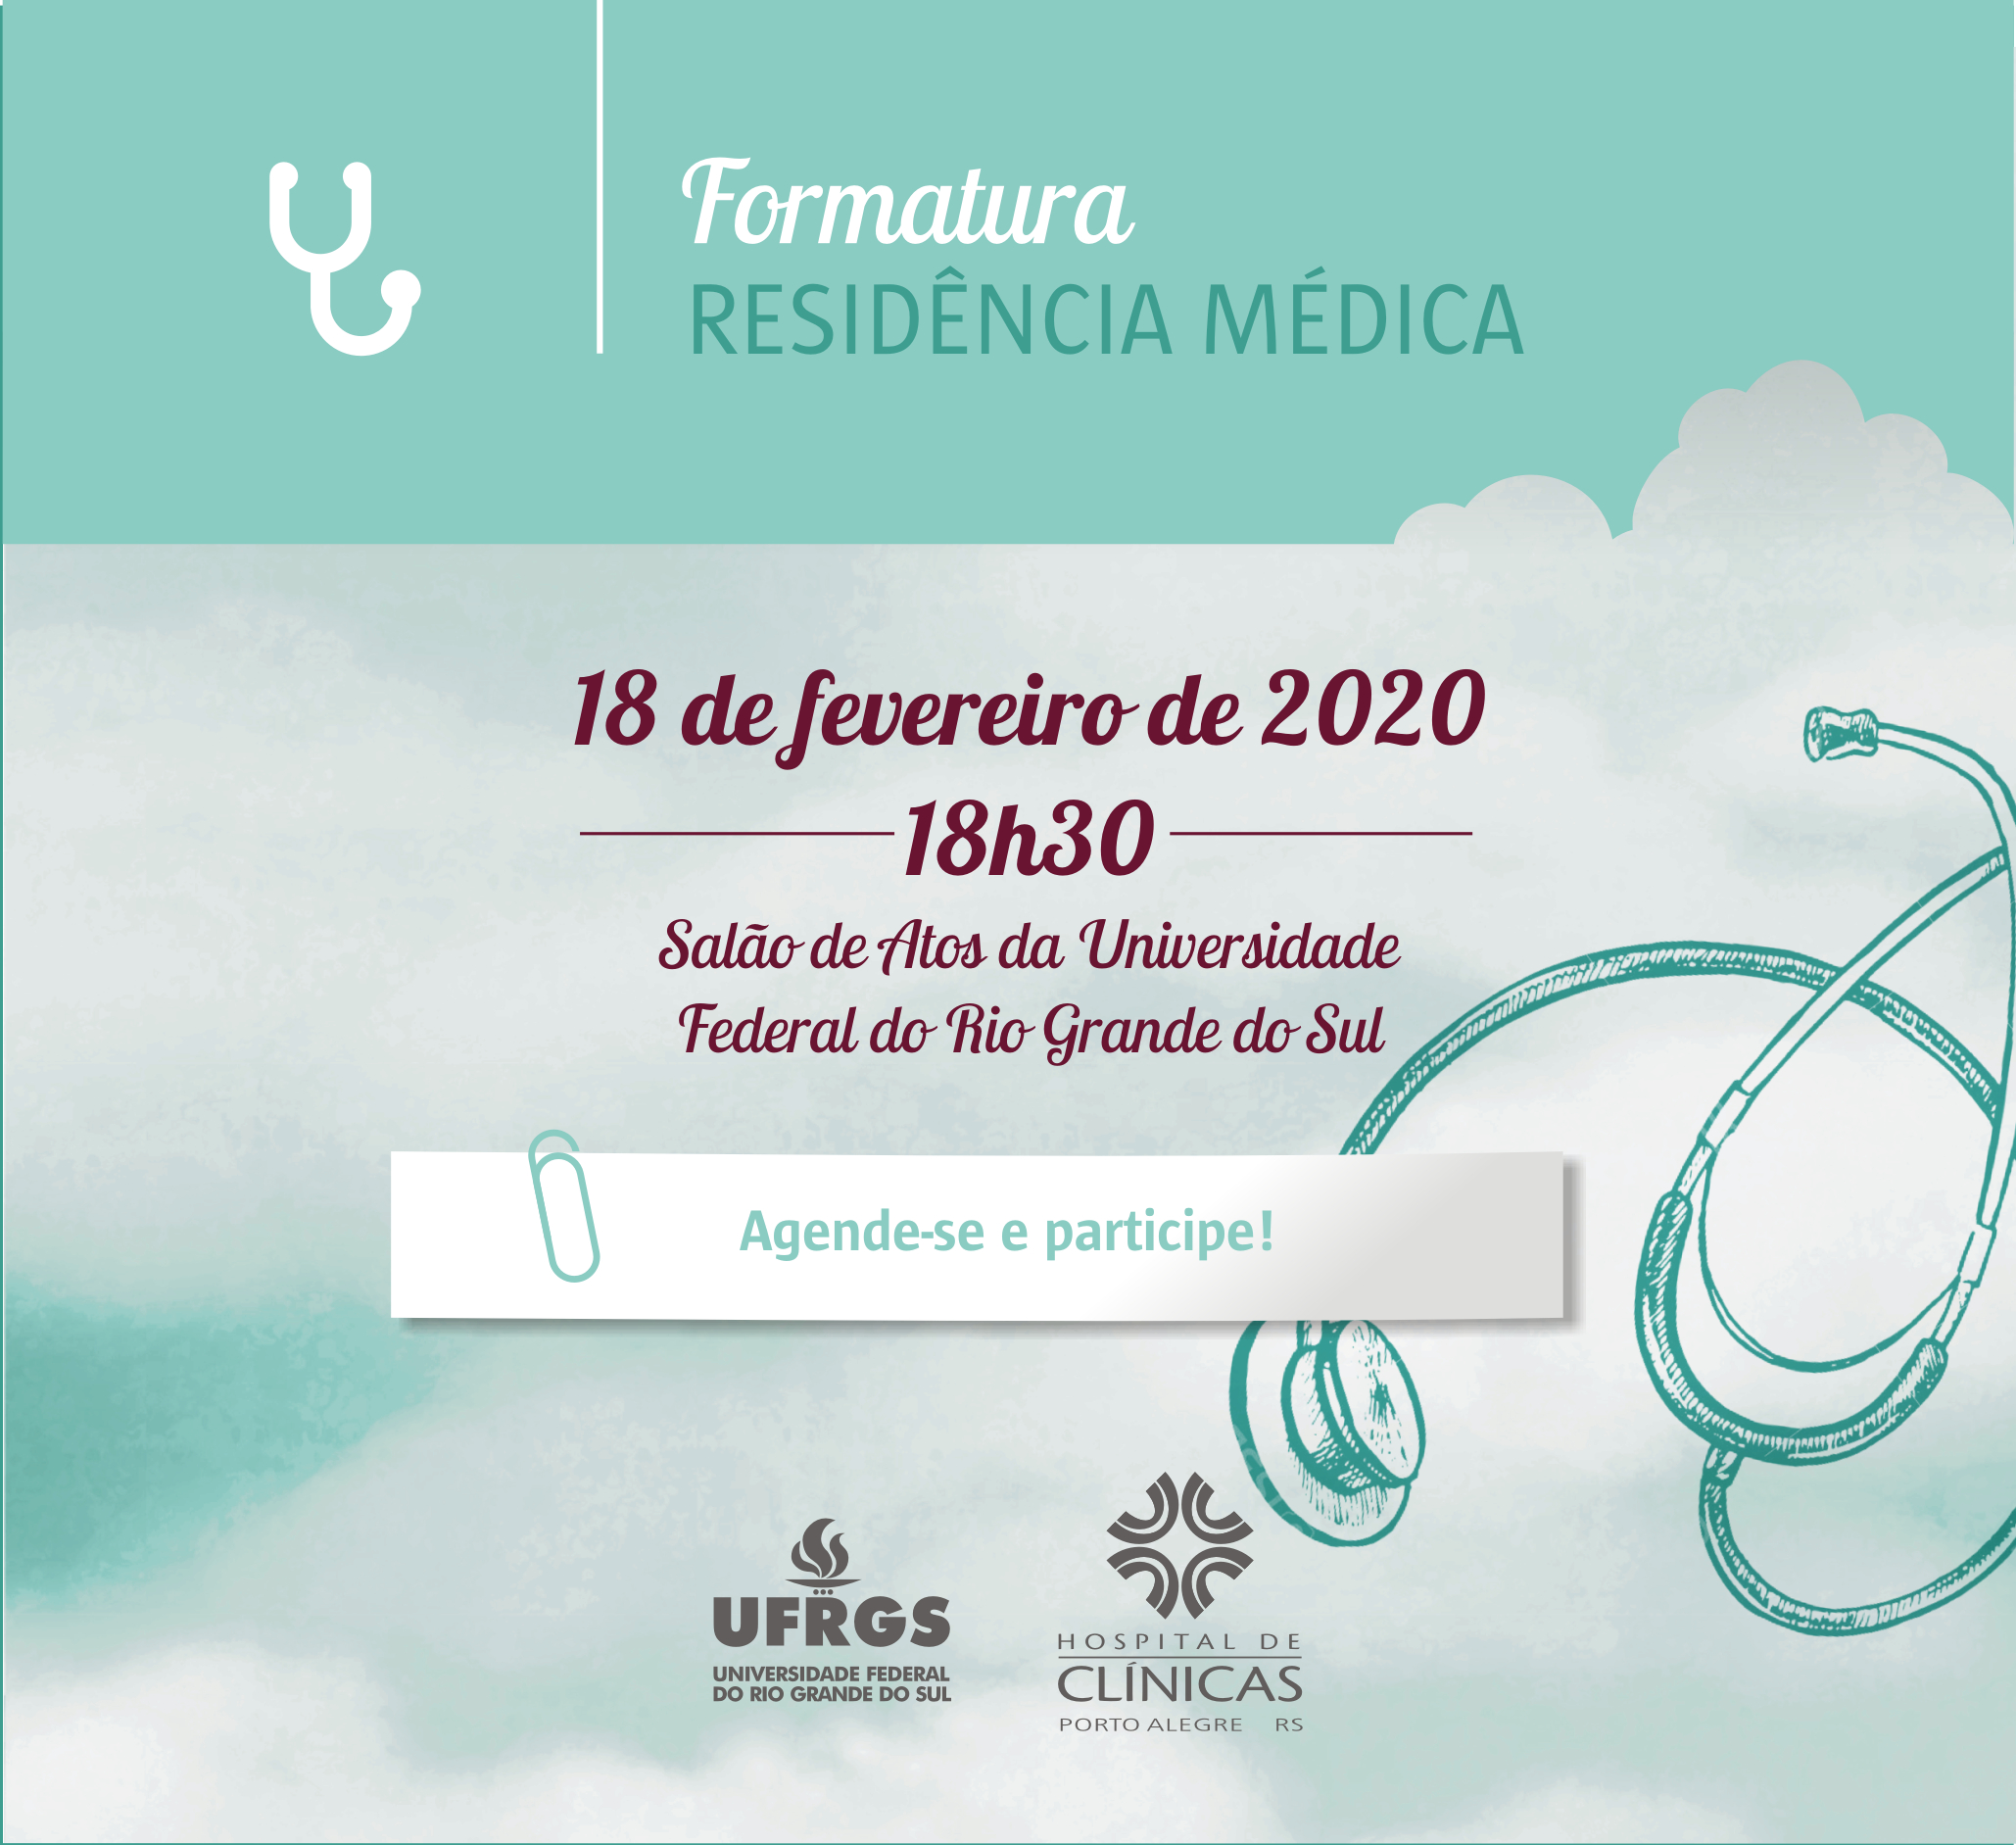 formatura medica save the date 2020 1